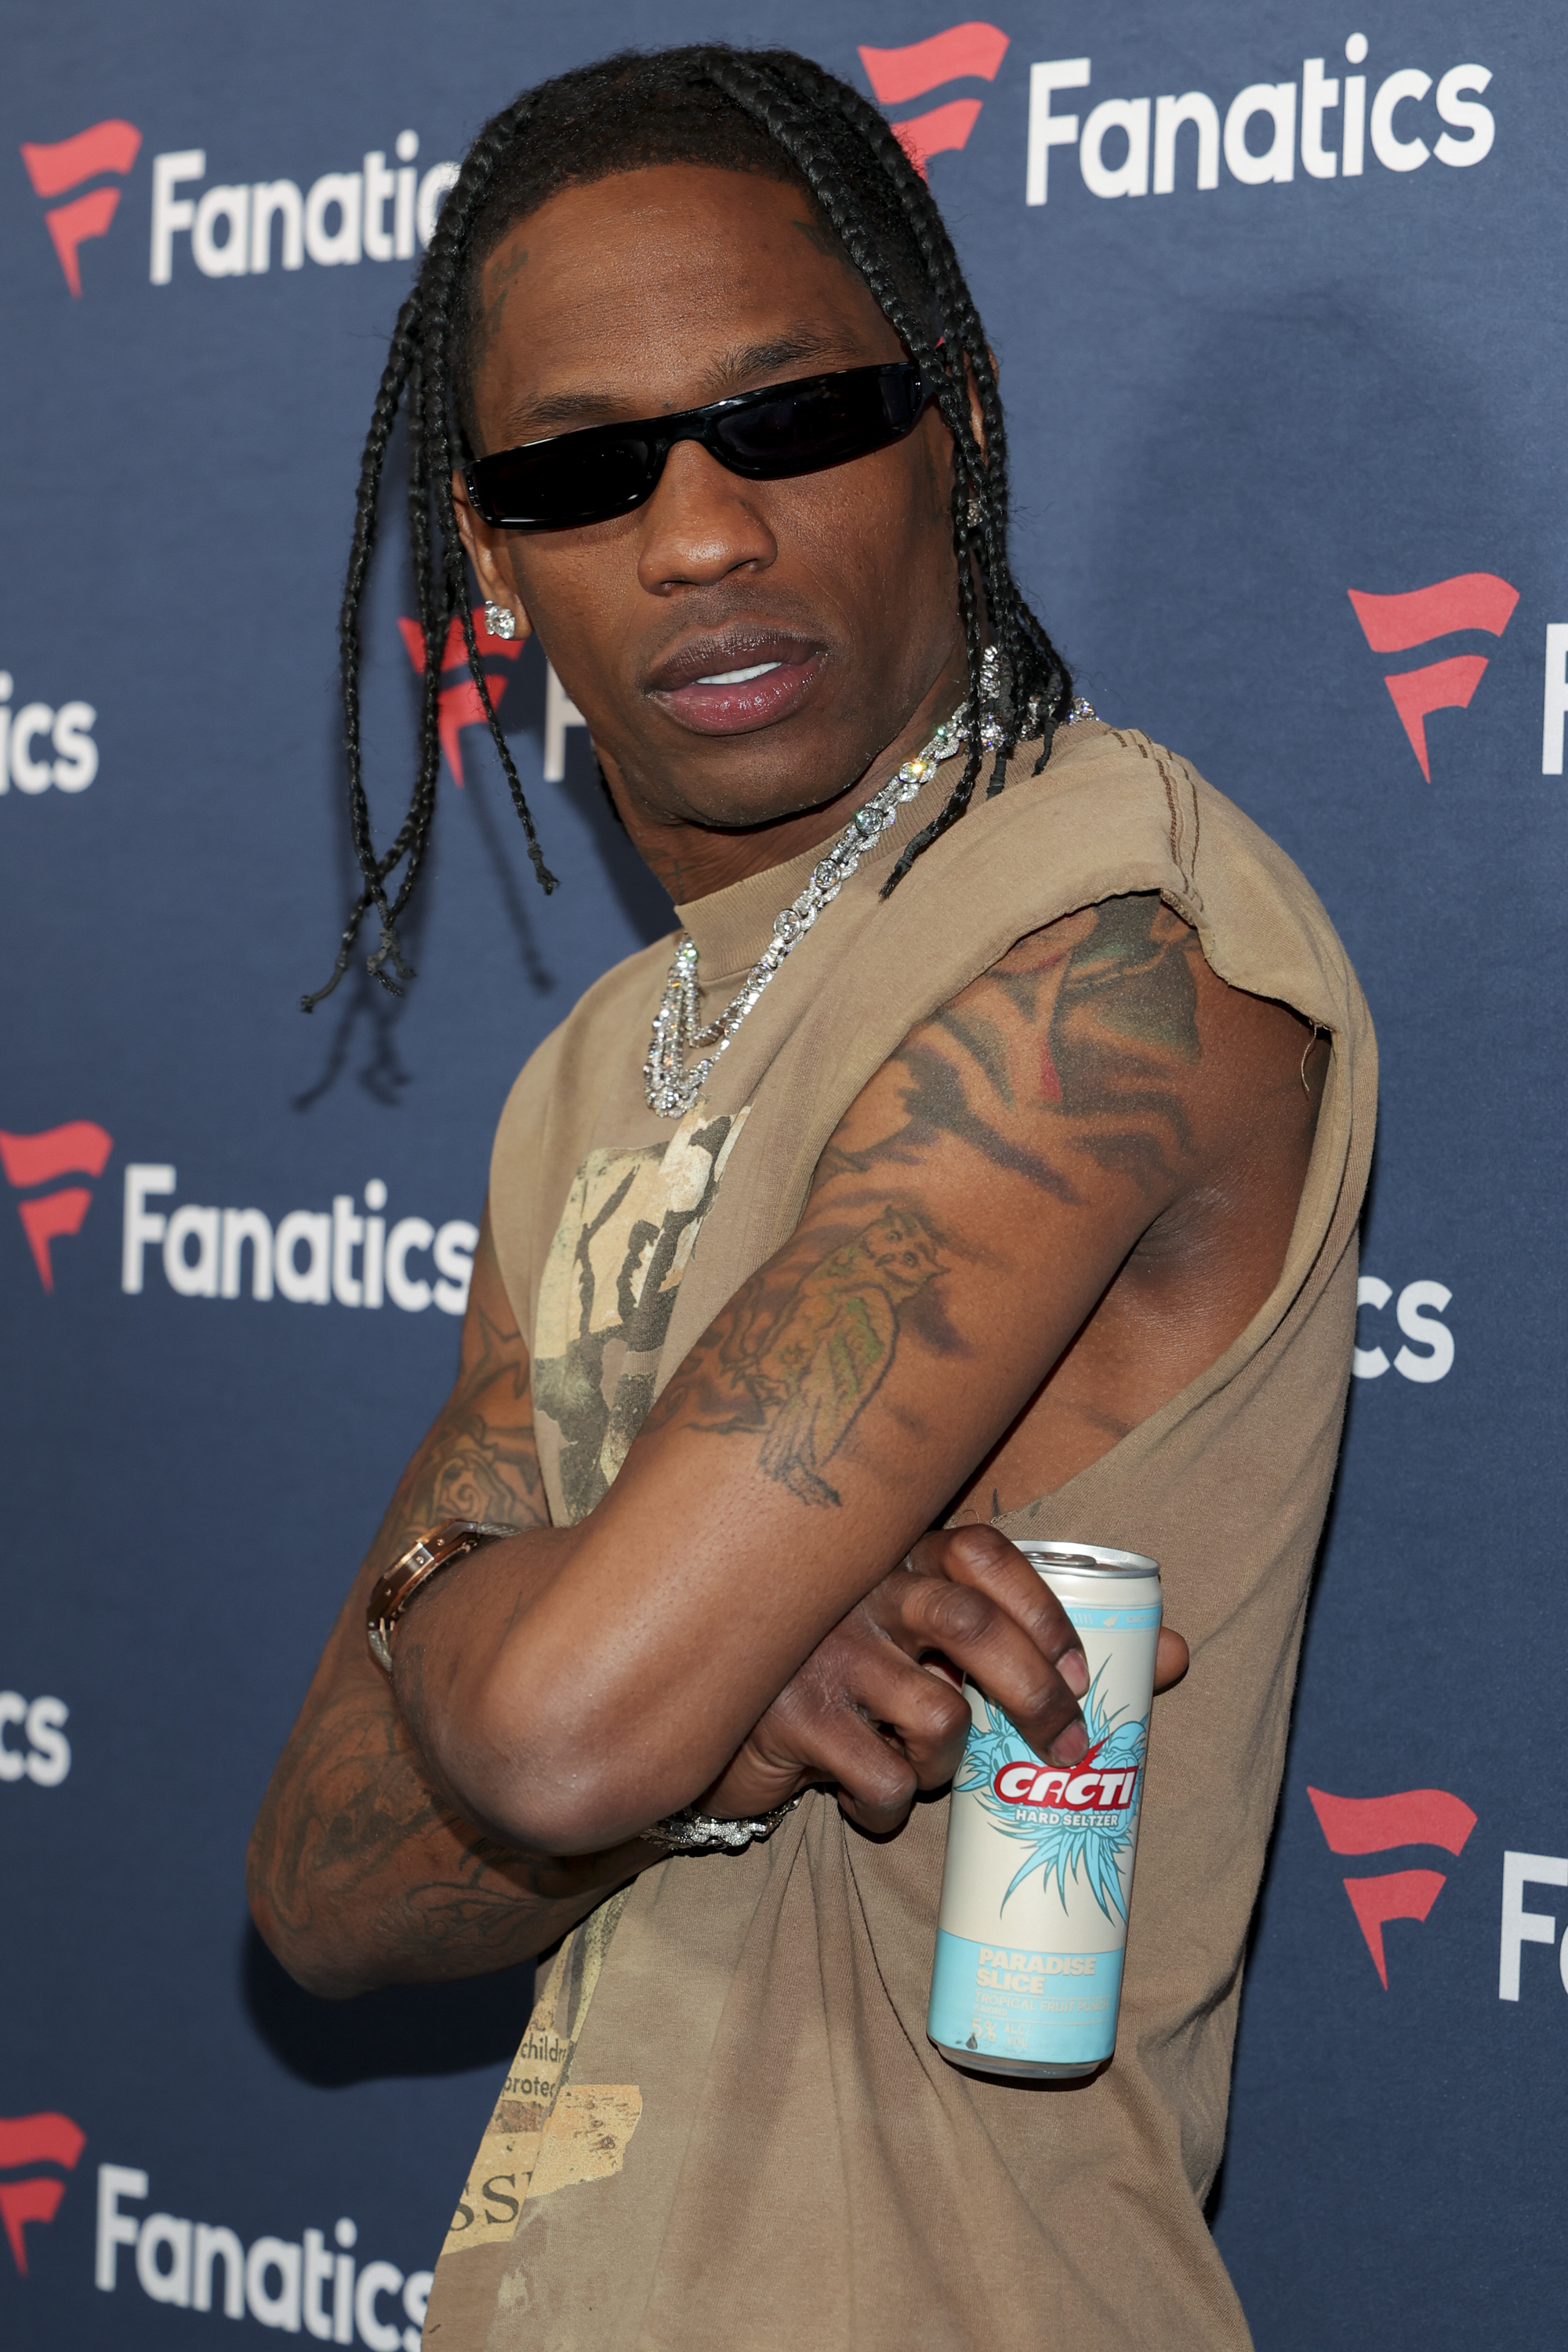 Travis Scott in a sleeveless top and chains, holding a can, with tattoos visible, posing